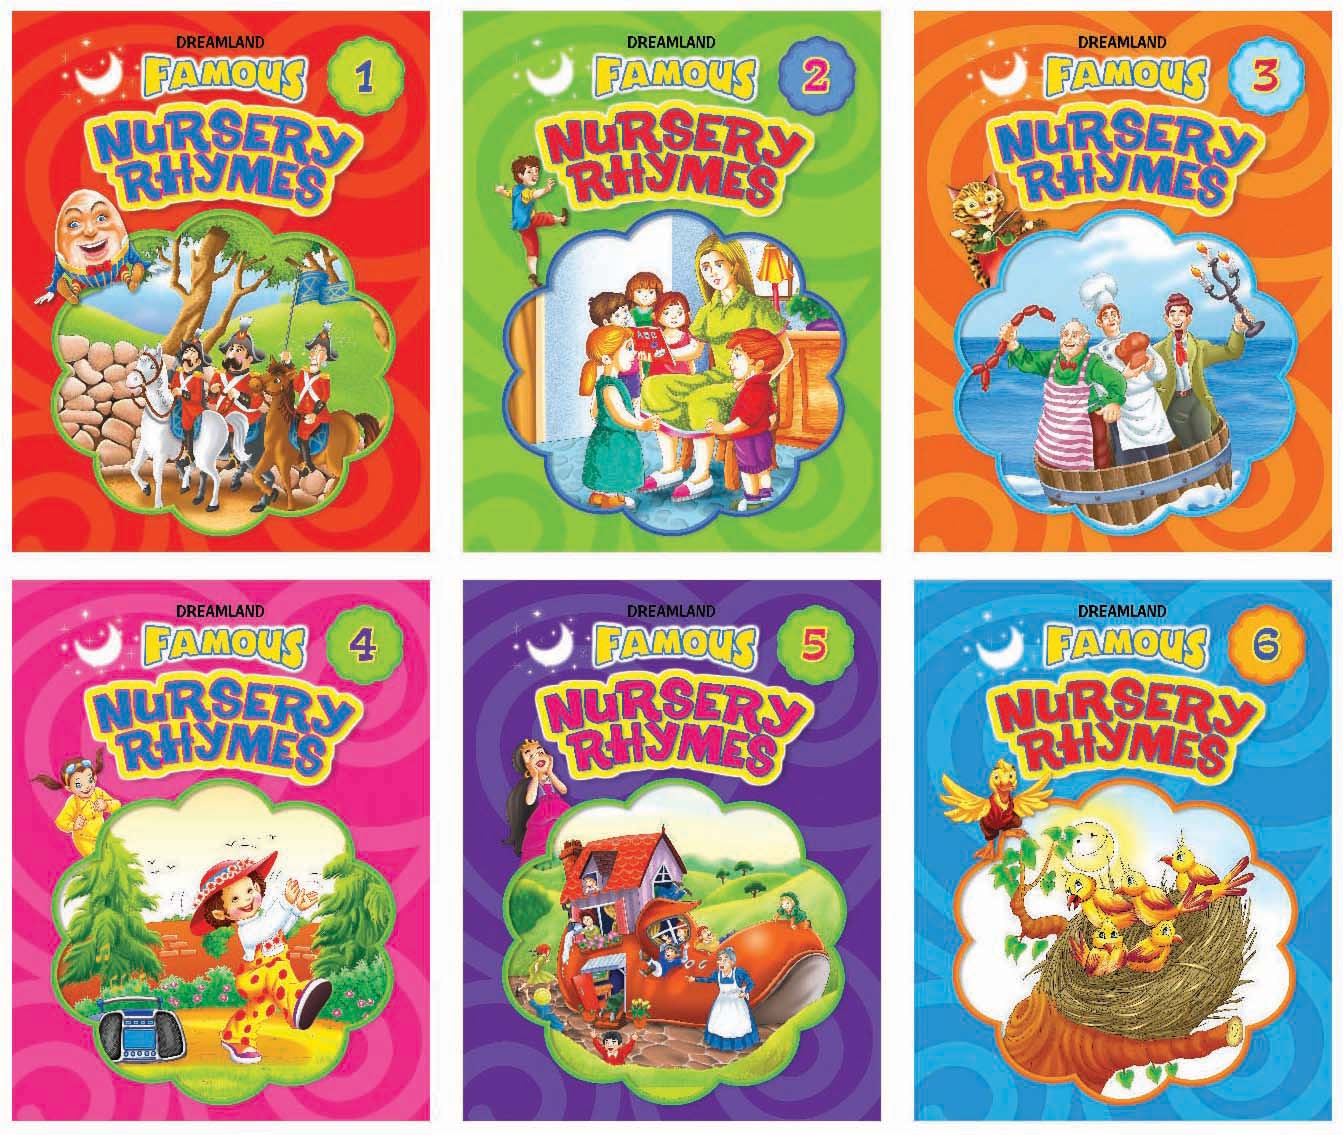 Famous Nursery Rhymes. - 1 to 6 (pack)